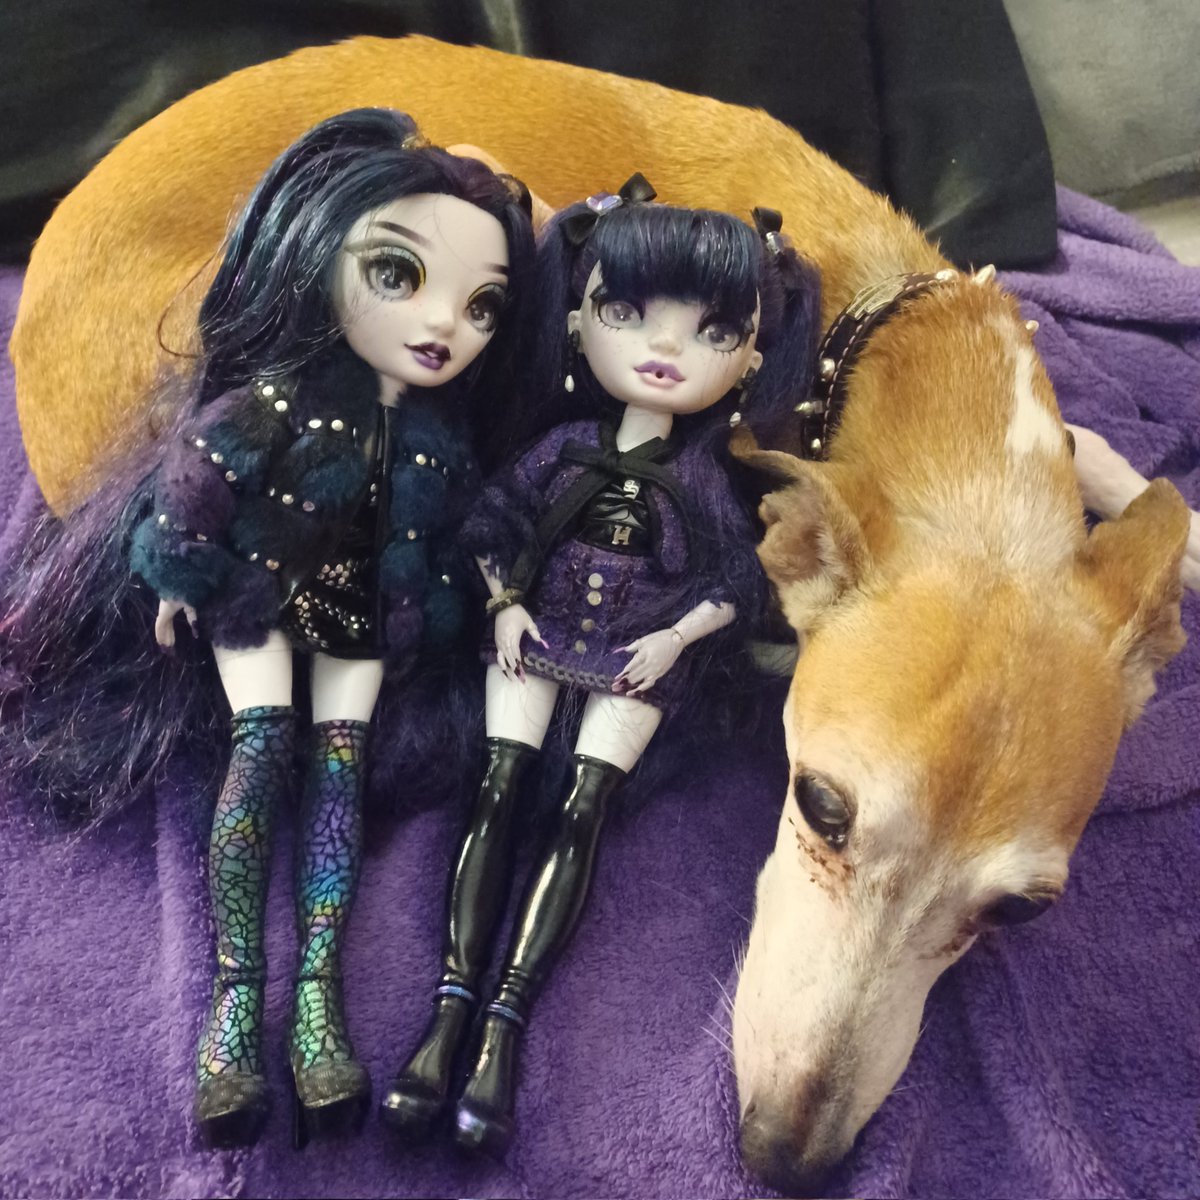 It's raining where I am today, so N and V got to have a special guest in the room today! The dog's name is Lucy, and nobody can figure out if she's an Italian Greyhound or a Whippit.🖤💜